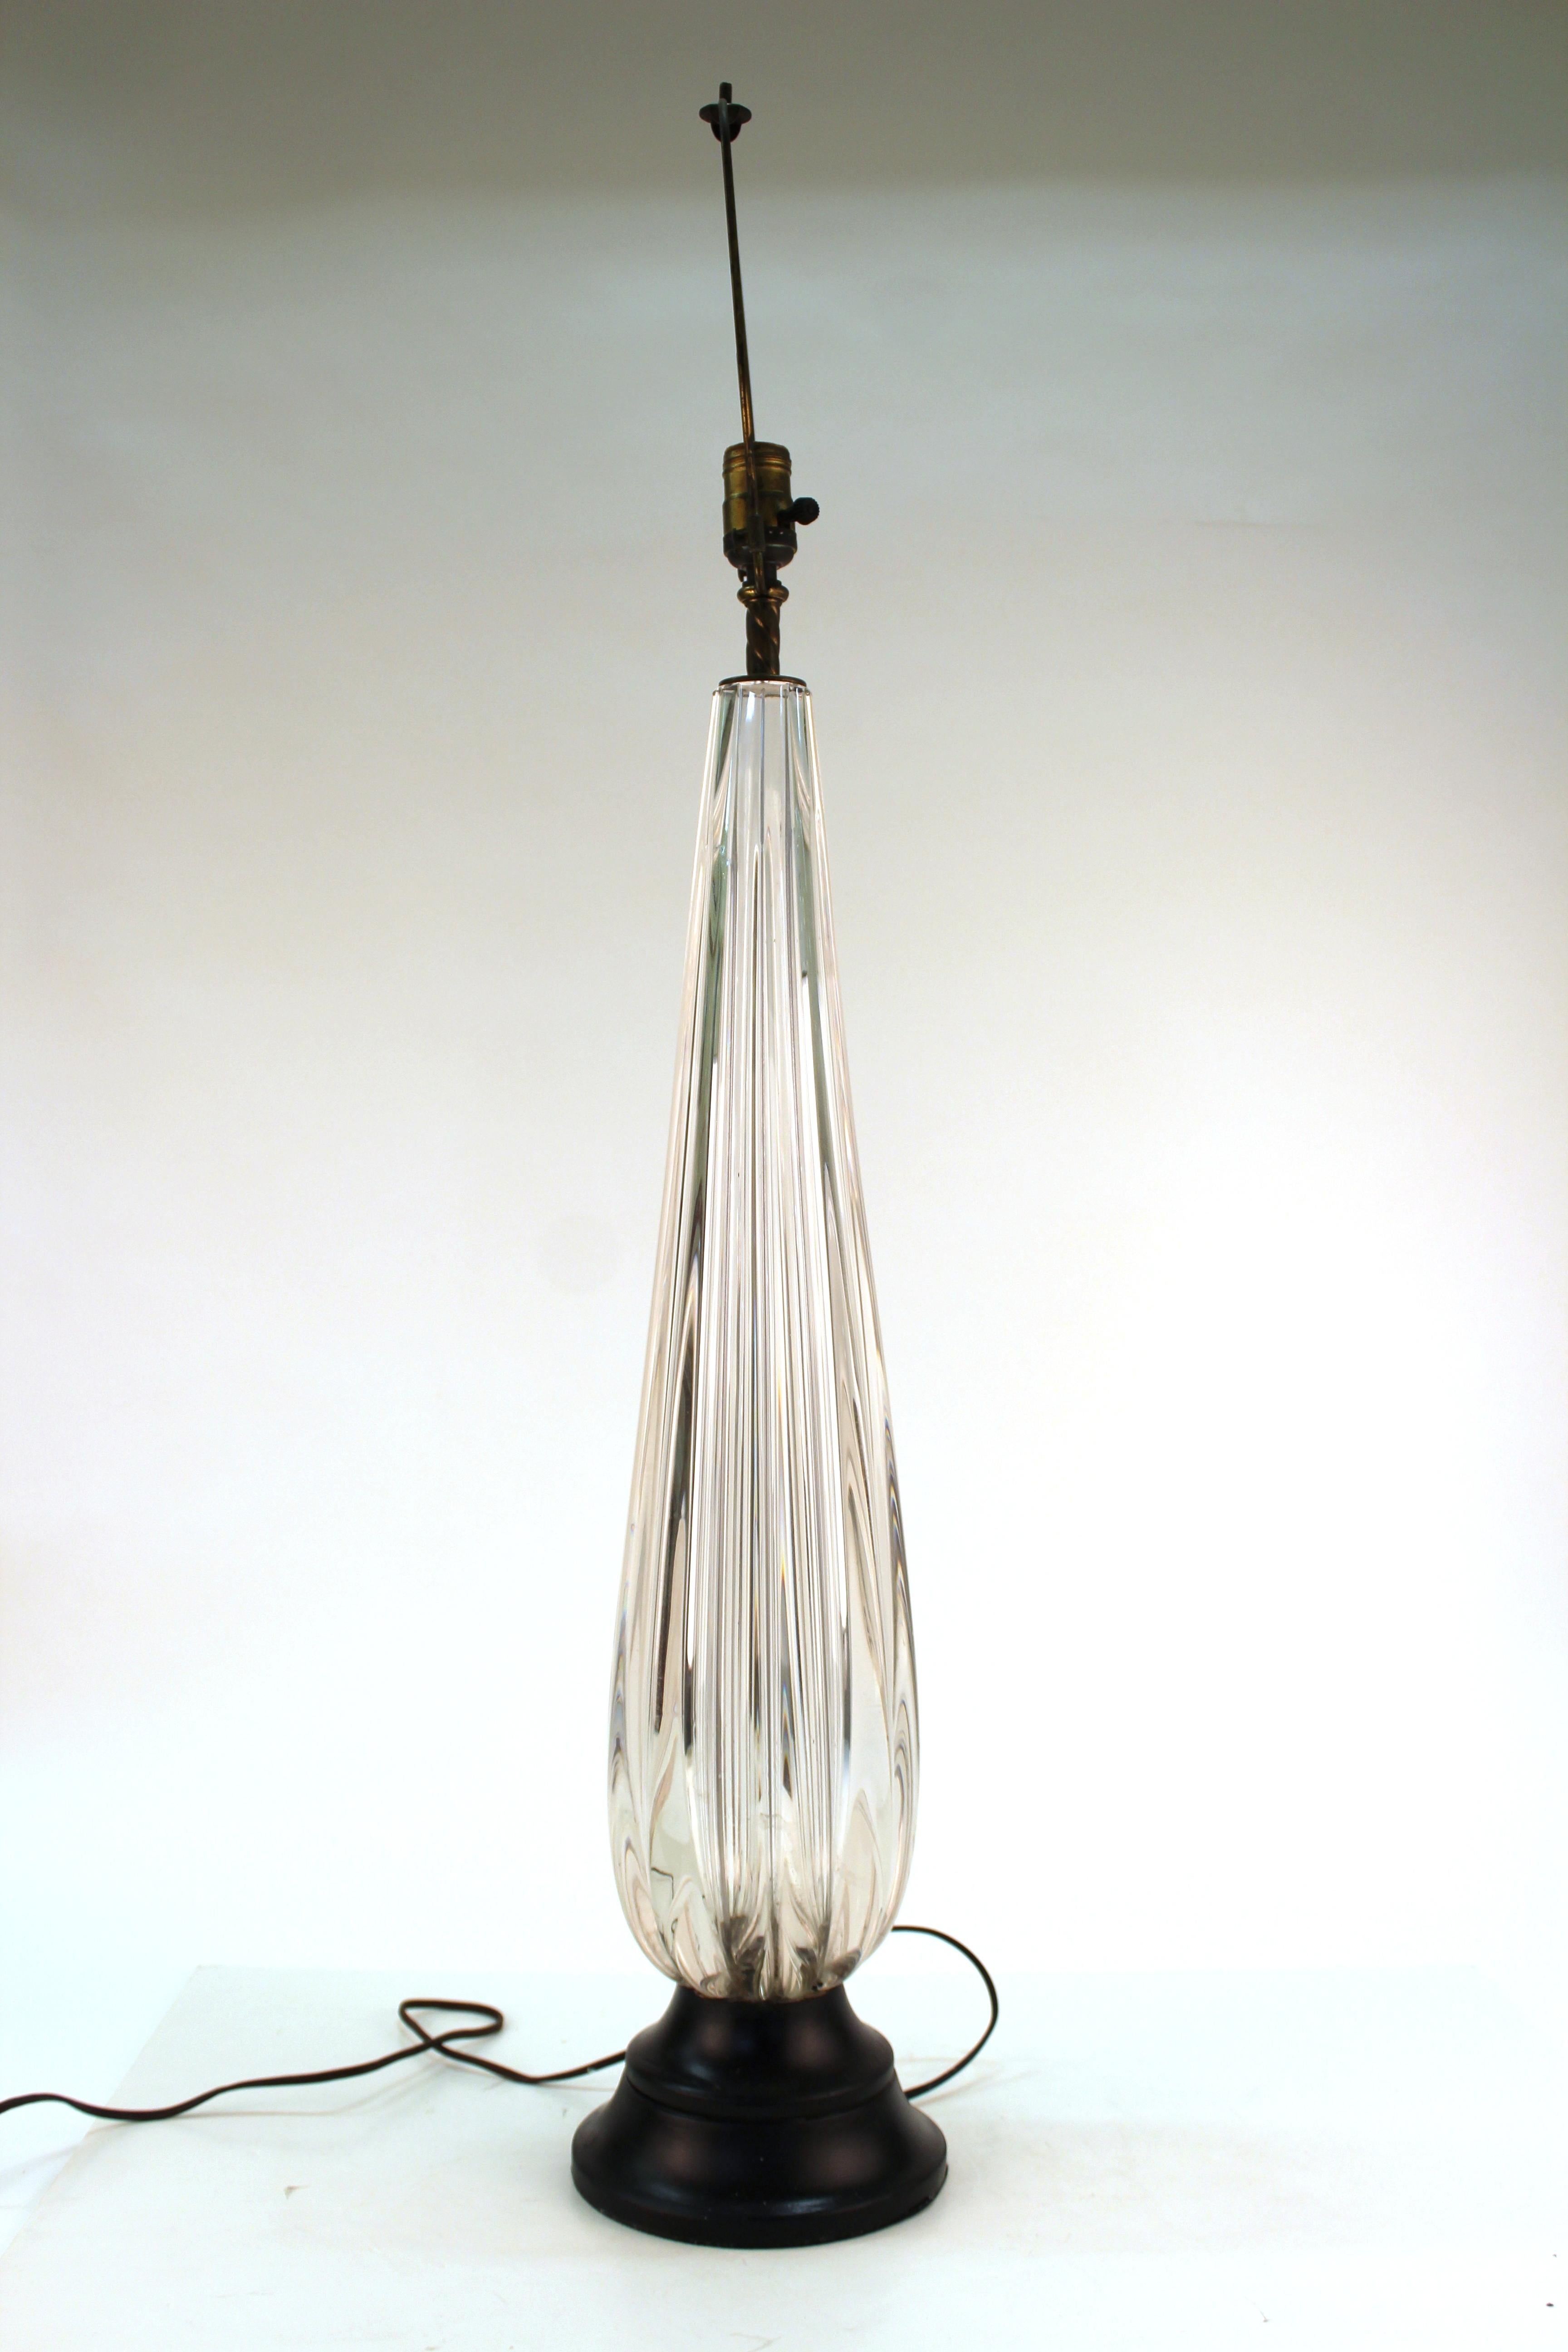 Mid-Century Modern Italian Murano glass table lamp with fluted clear glass atop a circular ebonized wood base. The piece was made during the mid-20th century in Italy and is in great vintage condition with some age-appropriate wear to the bottom of